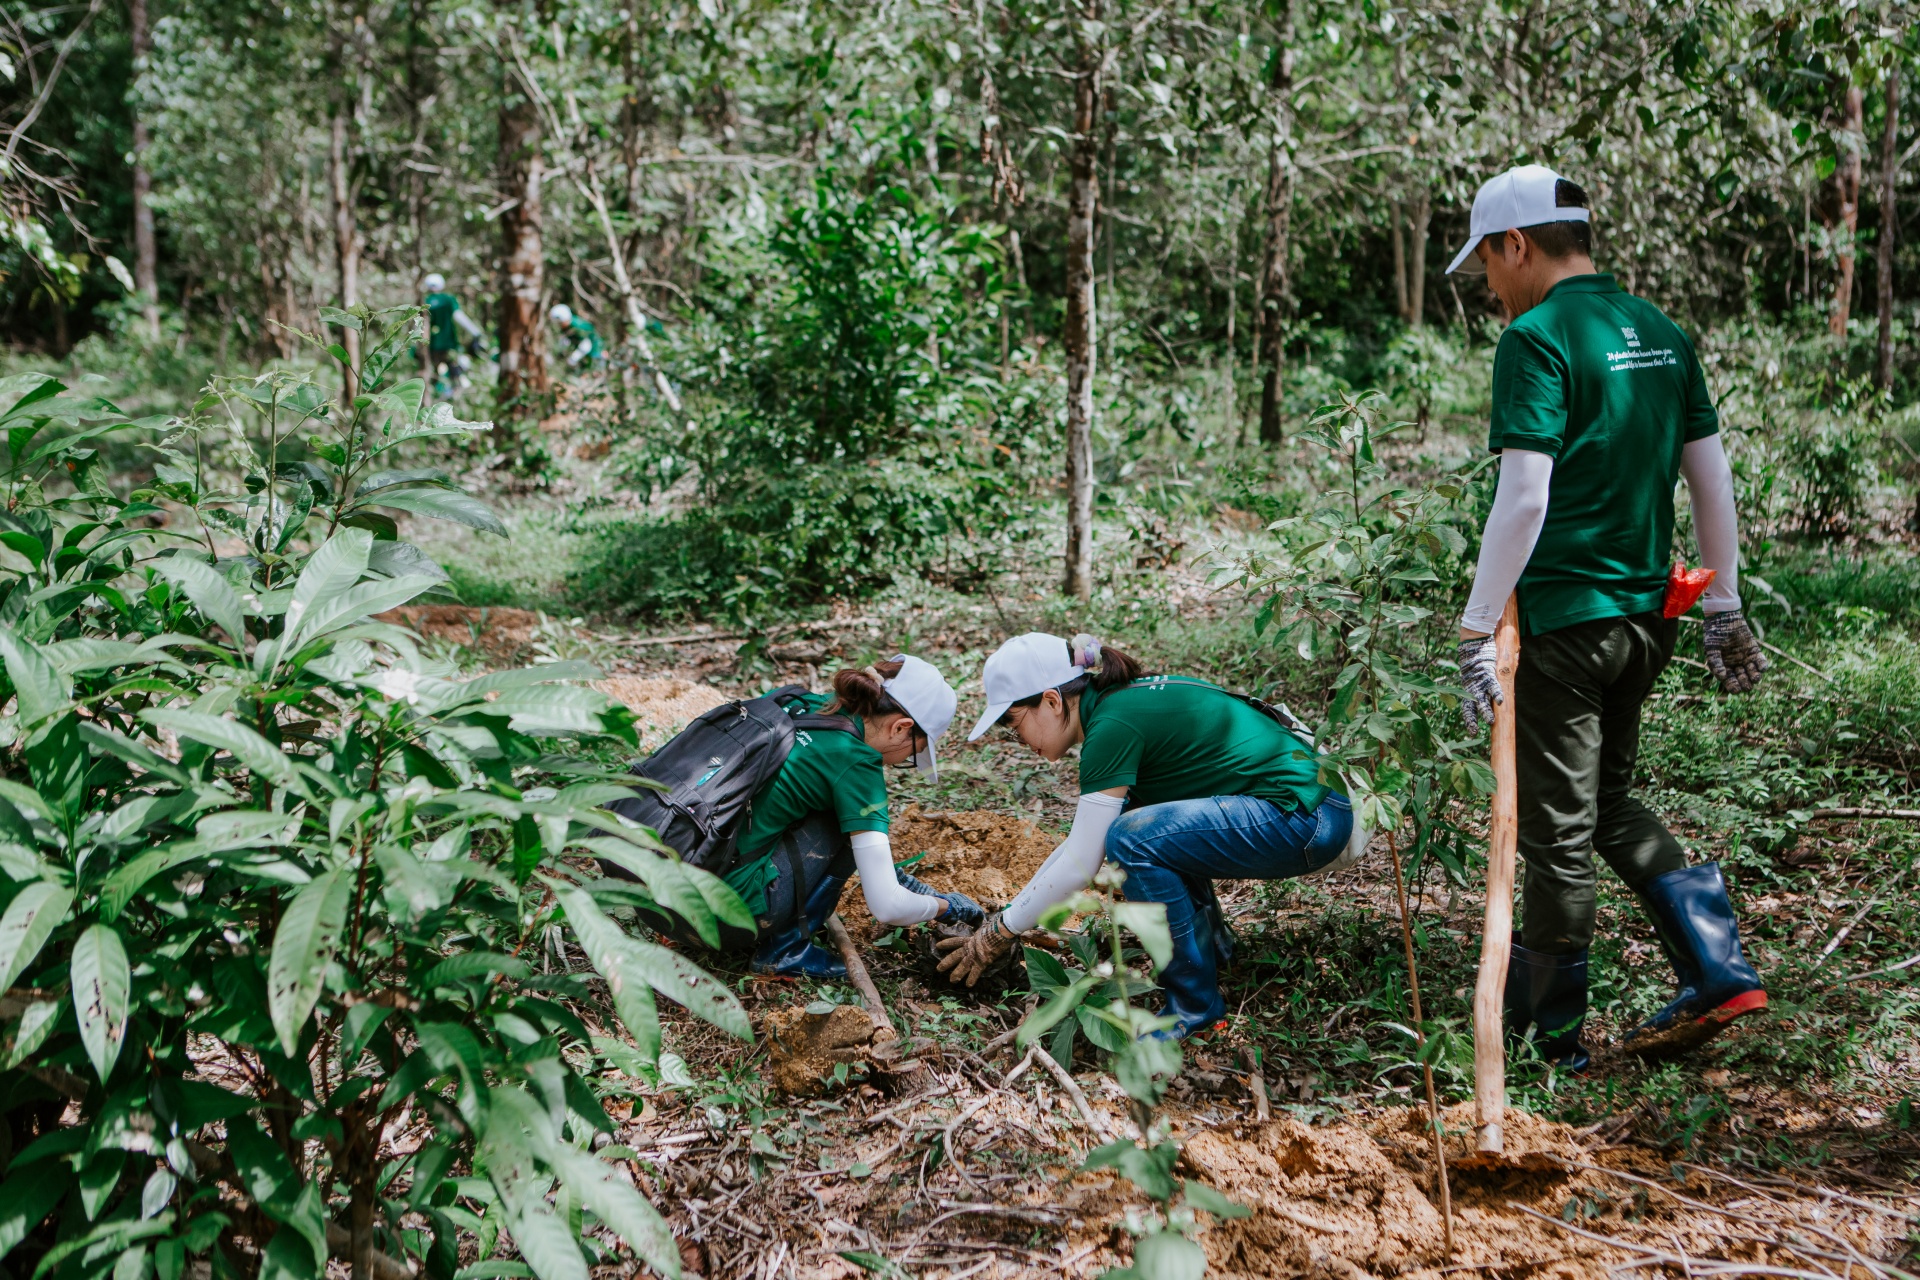 Nestlé recognised for efforts to protect forests